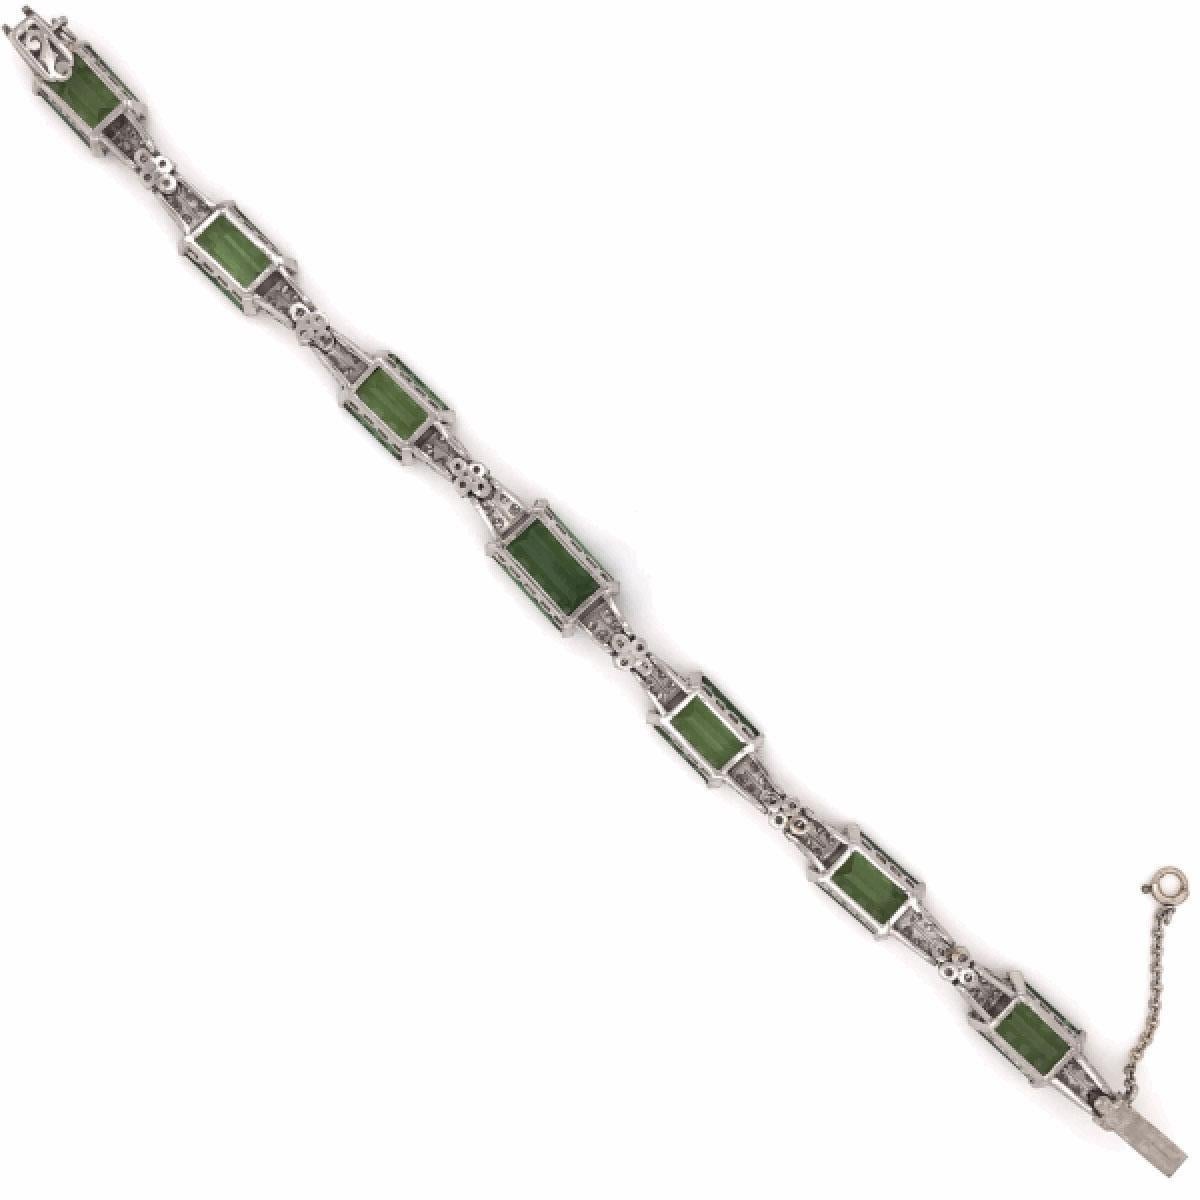 Simply Beautiful & finely detailed Art Deco Green Tourmaline and Diamond Platinum Bracelet set with securely nestled Tourmaline,  approx. 62 Carat total weight and Diamonds, approx. 2.40 Carat total weight; Bracelet  measures approx. 7 inches long.